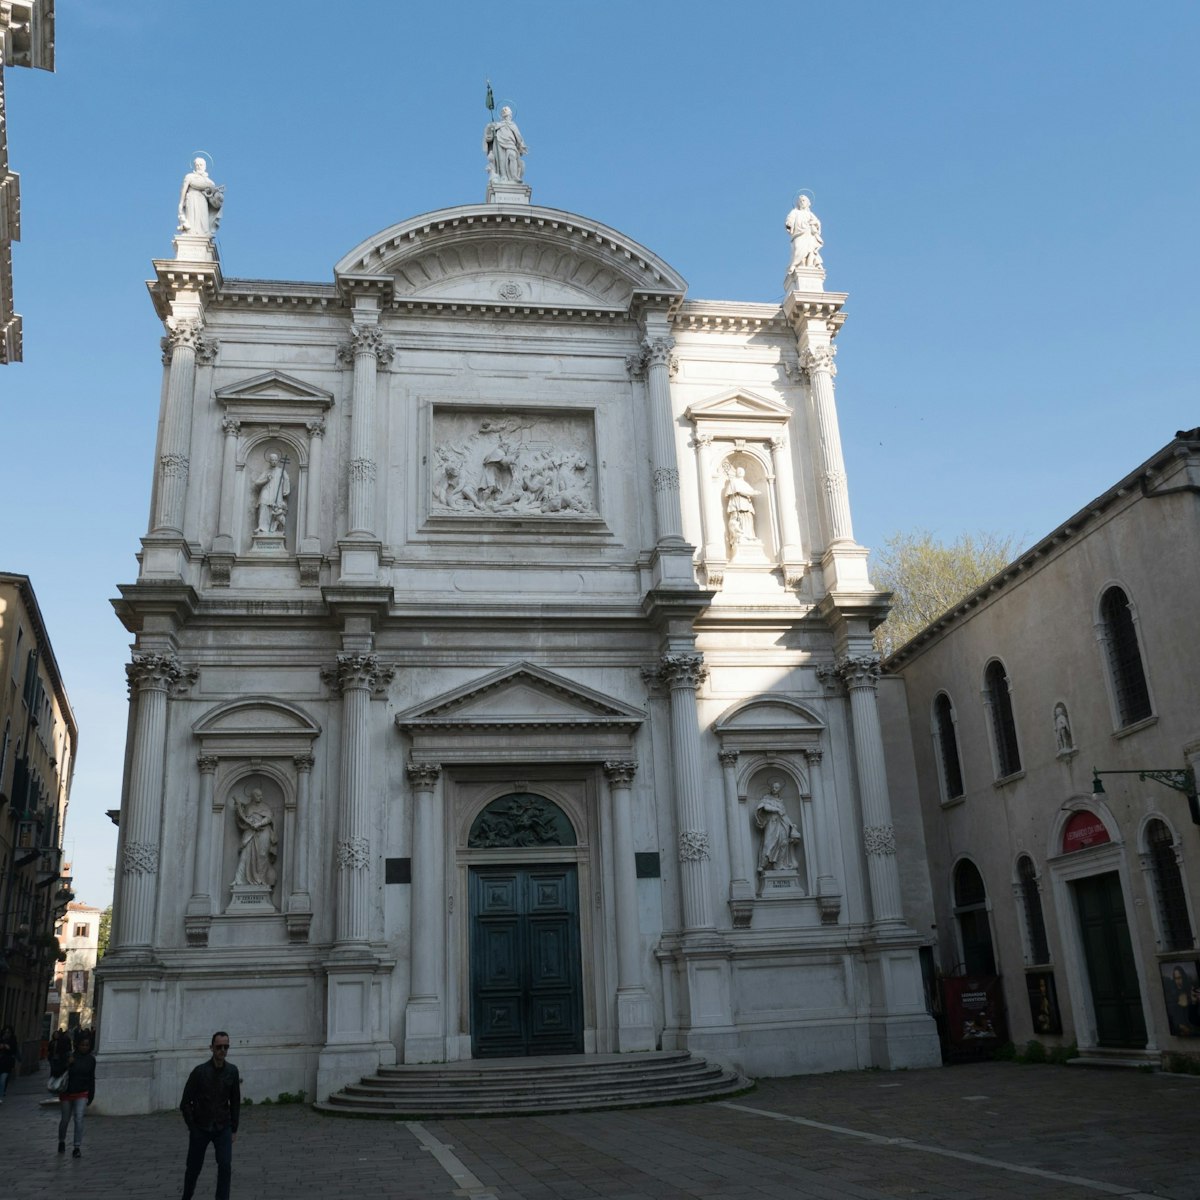 The Chiesa di San Rocco stands in its eponymous square